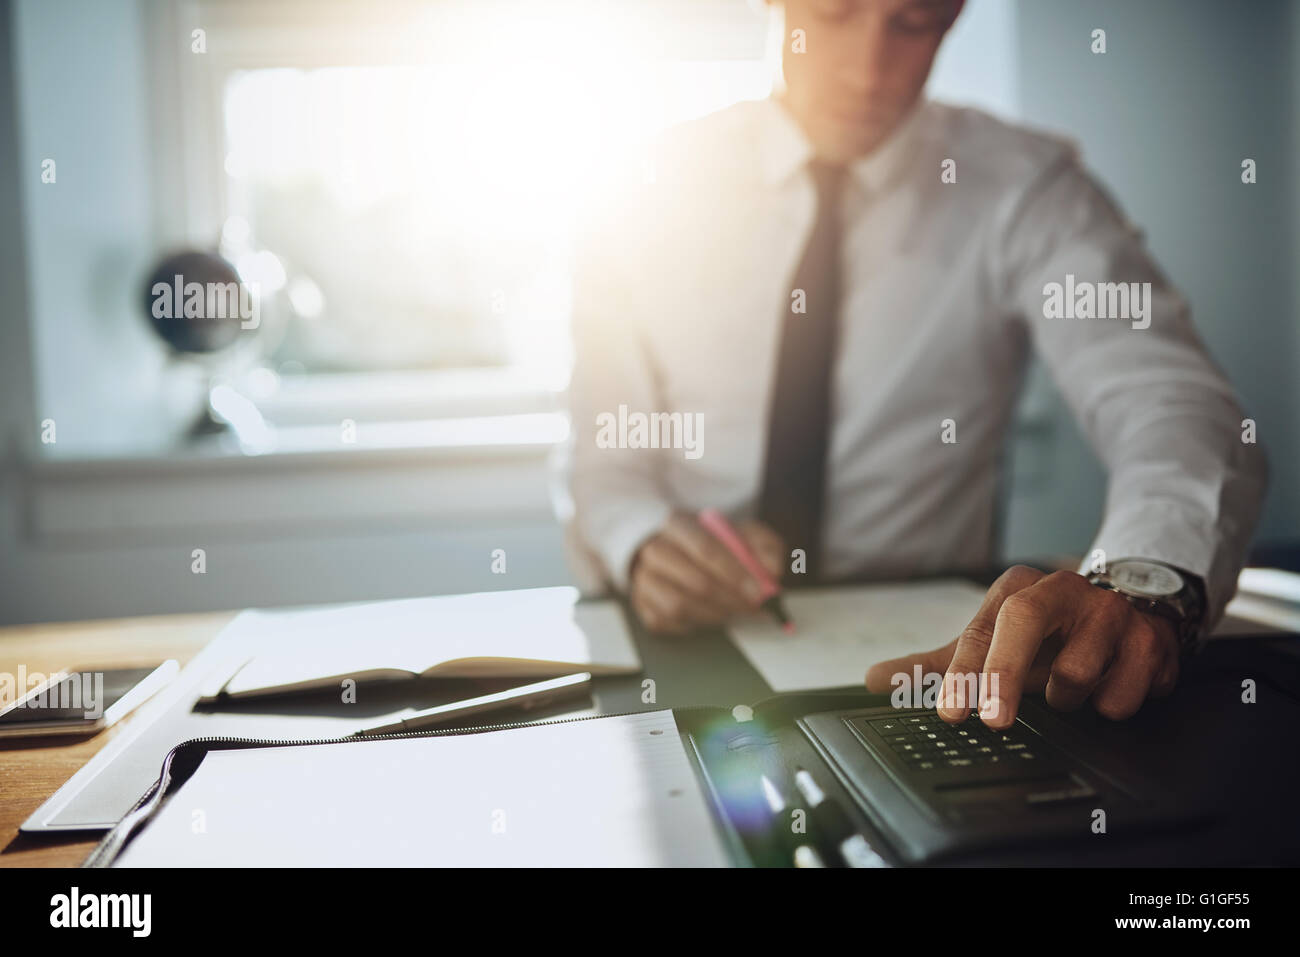 Business man working on documents, close up, lawyer accountant concept Stock Photo